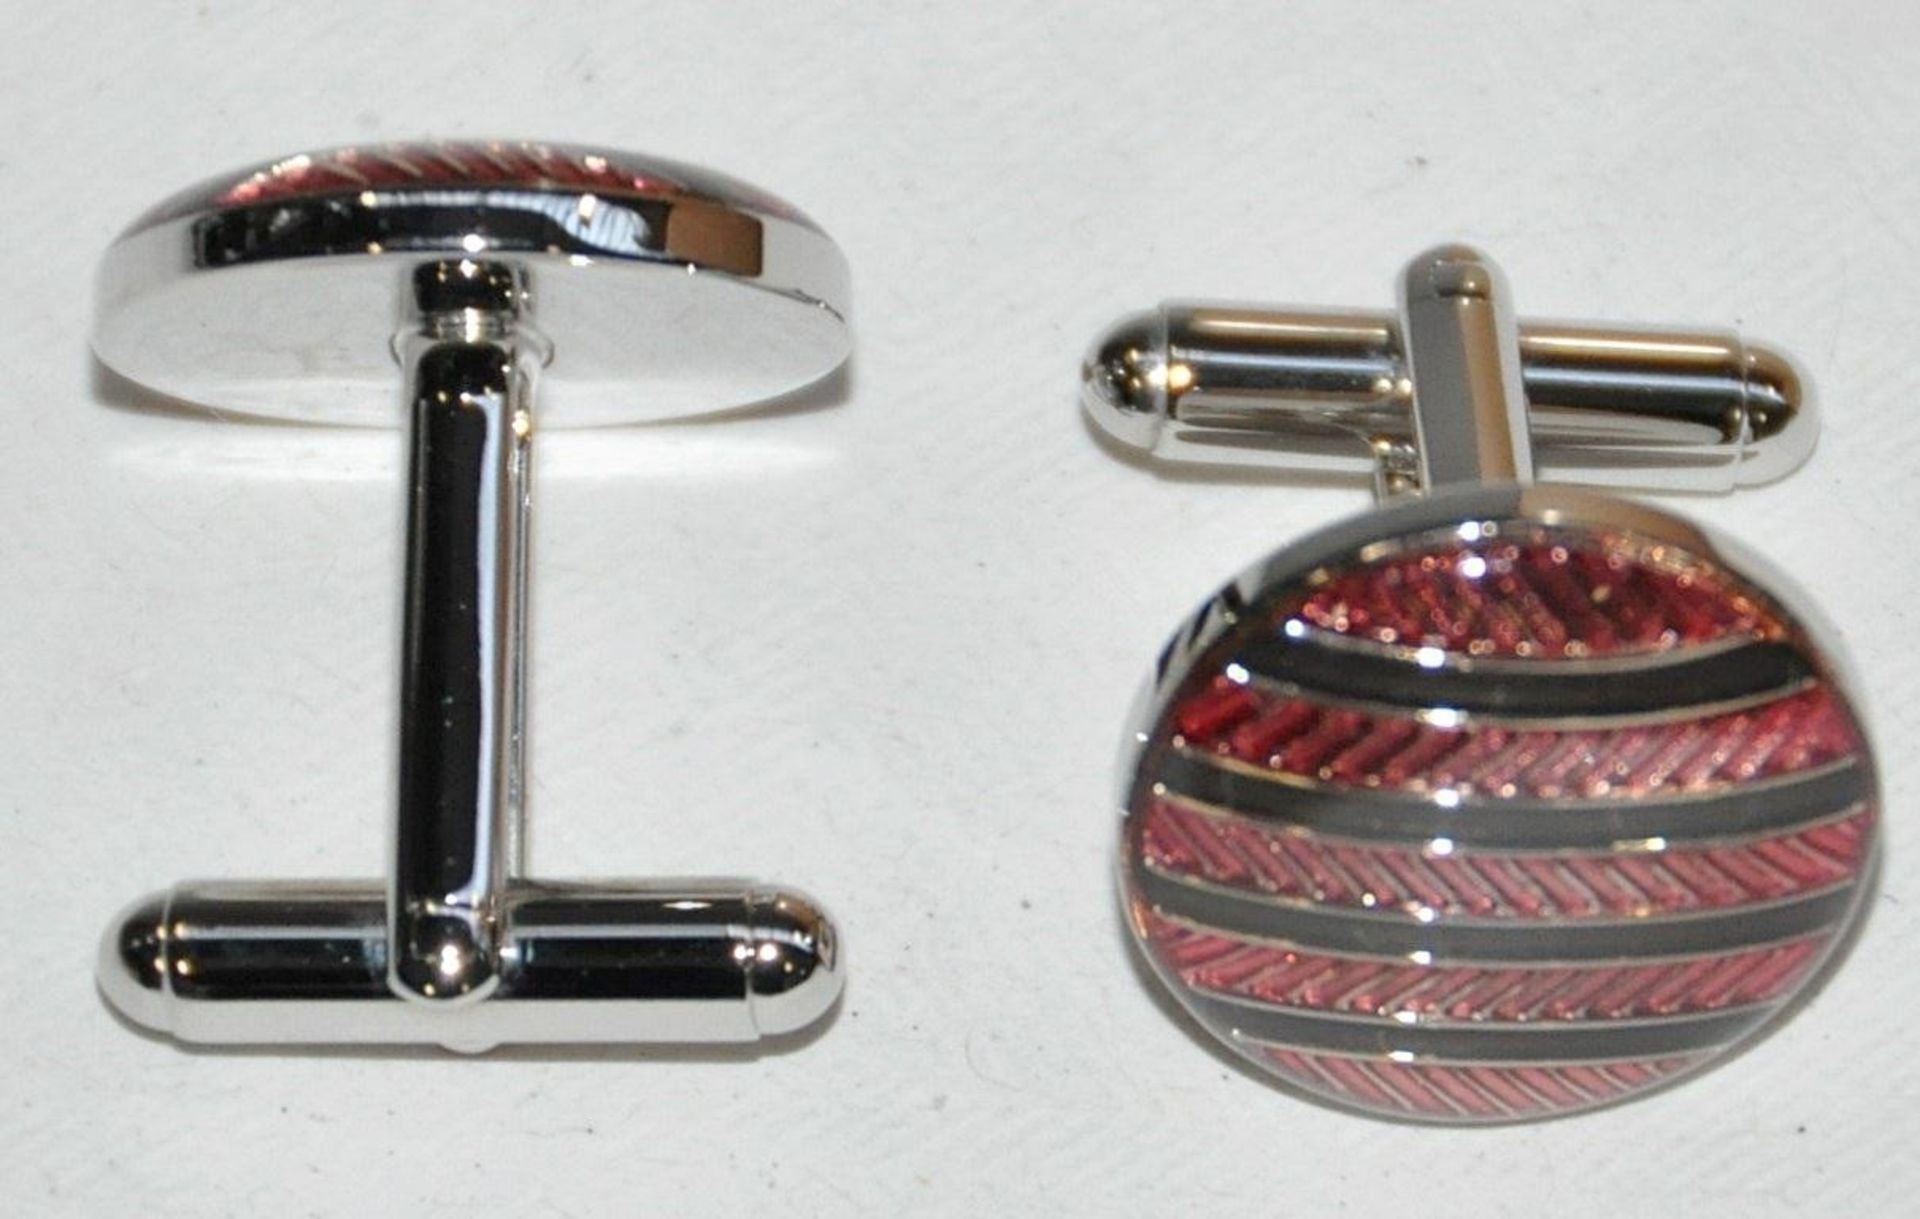 10 x Pairs of Genuine “Circle, Stripe” Enamel CUFFLINKS by Ice London – Silver Plated, 2 Colours - Image 3 of 3